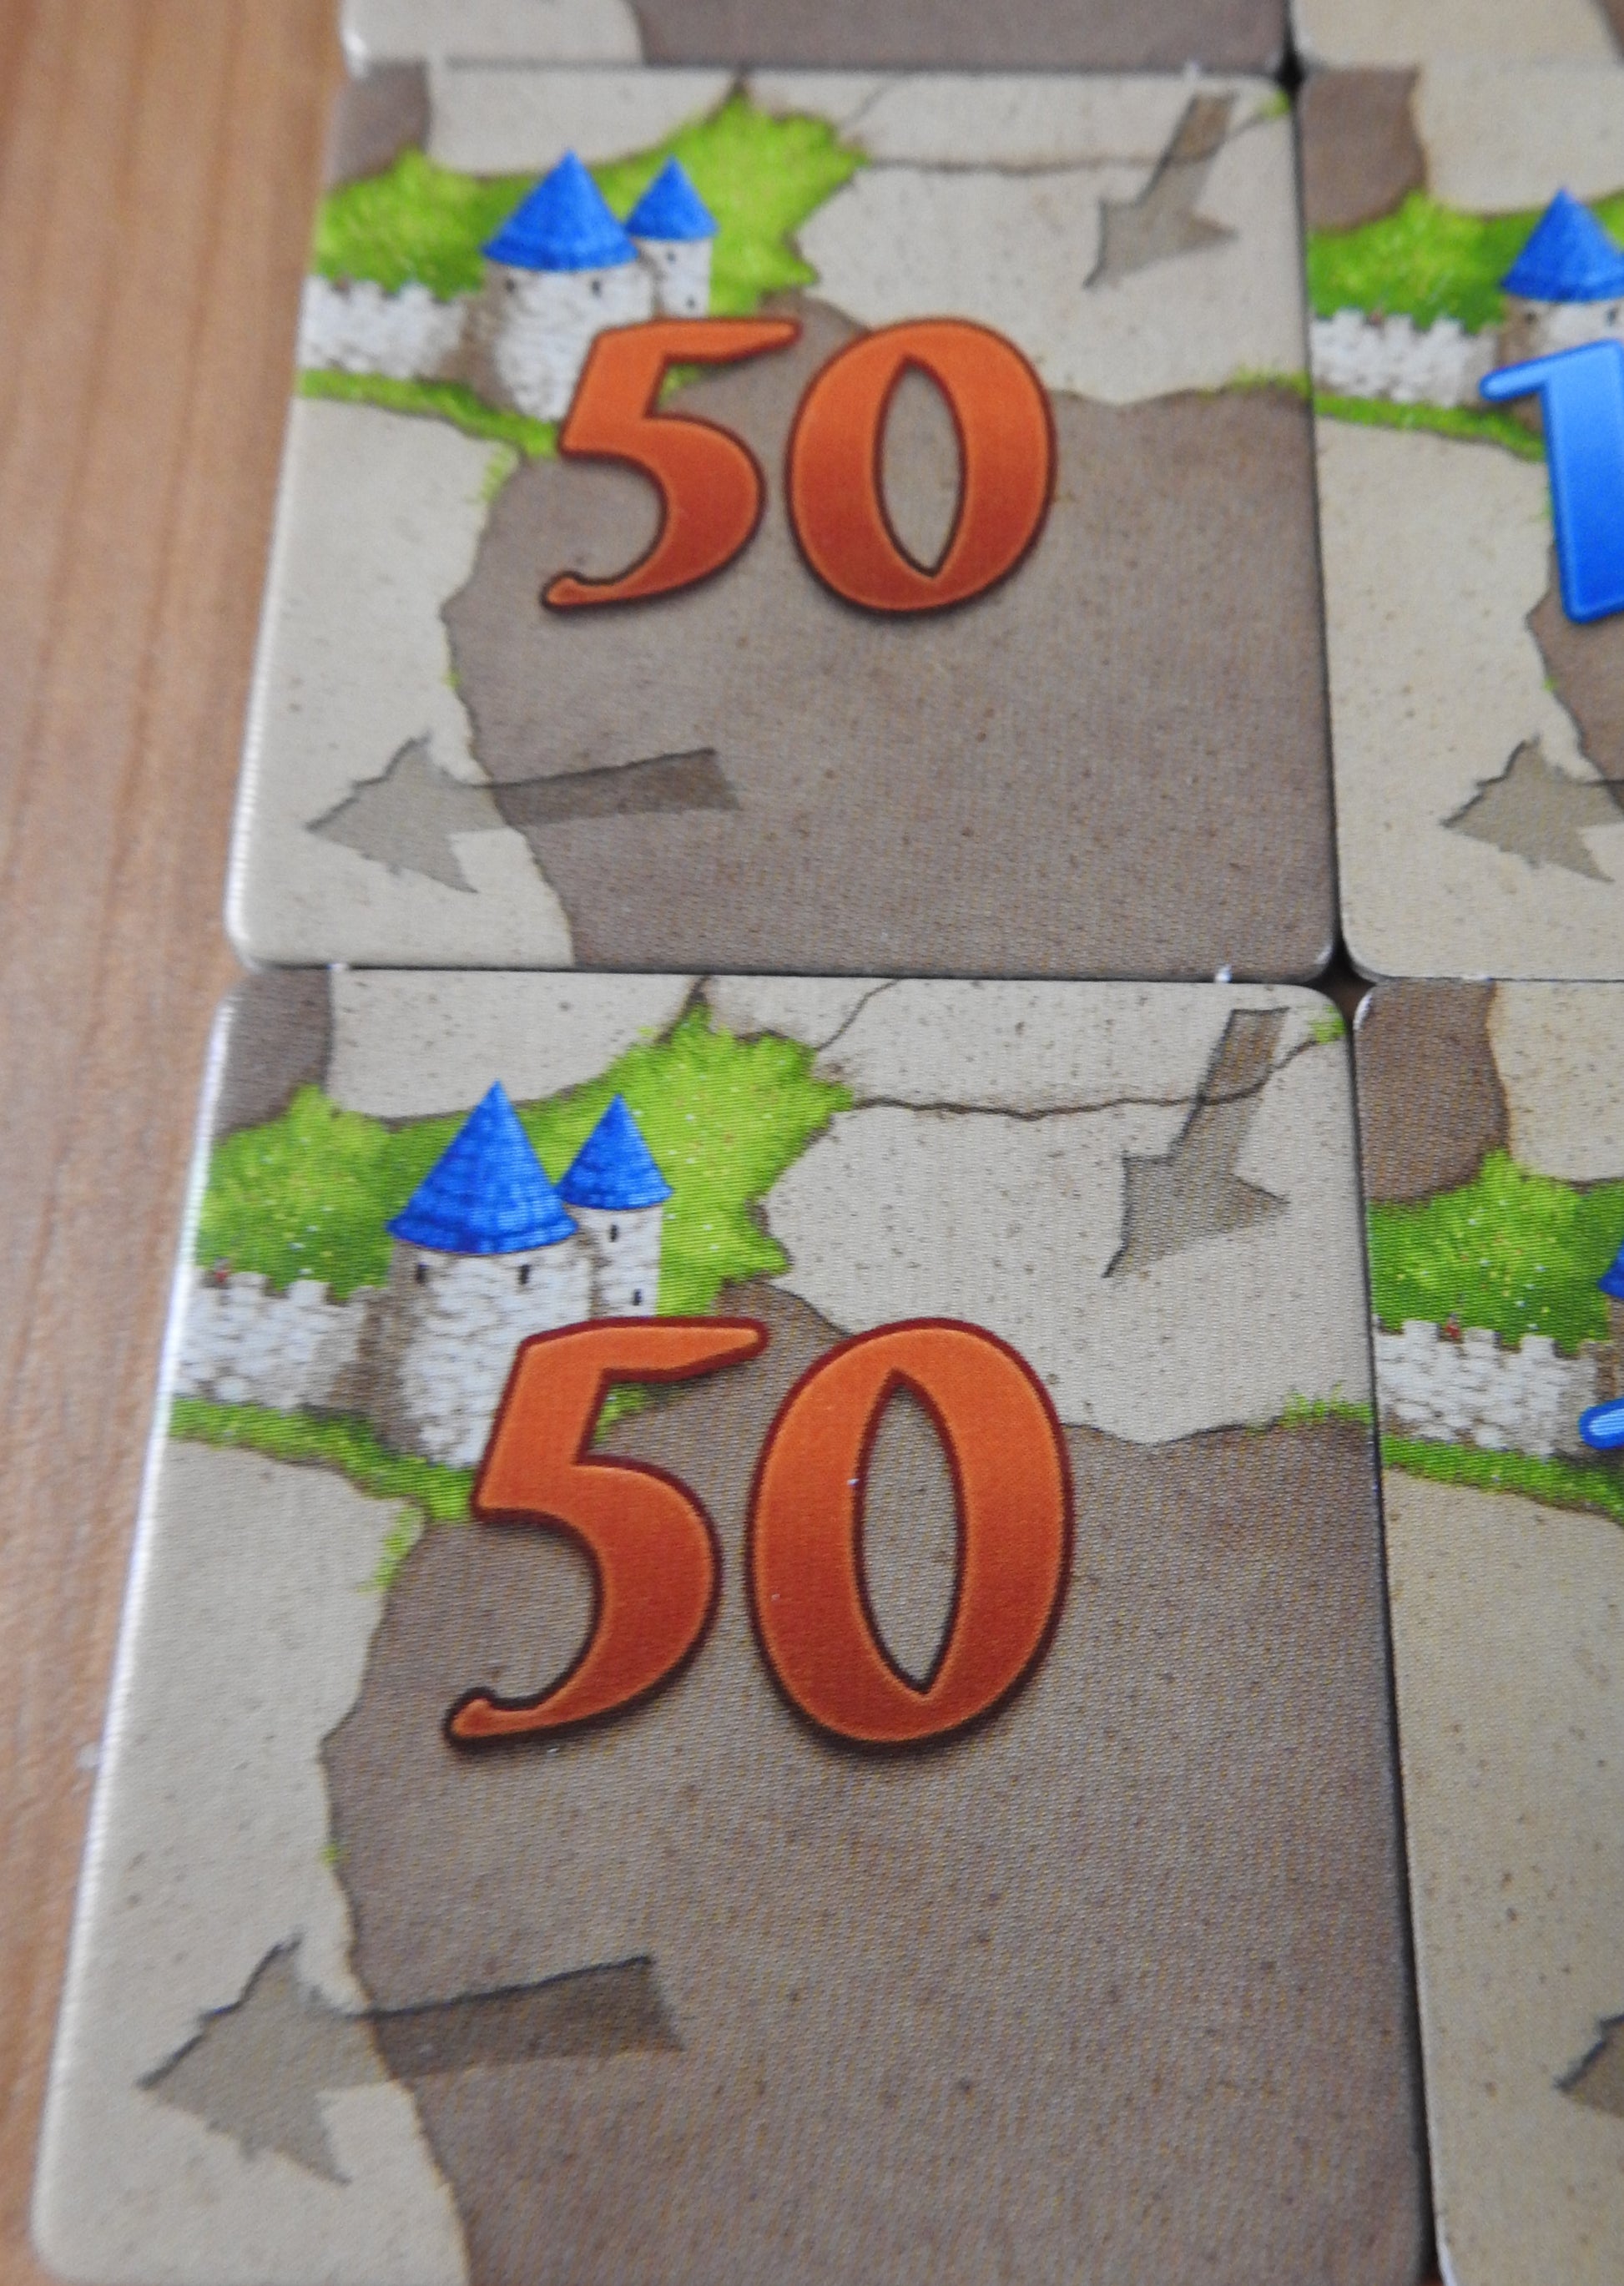 A close-up of some of the '50' tiles that come with this 6 Extra Scoring Tiles accessory for Carcassonne.